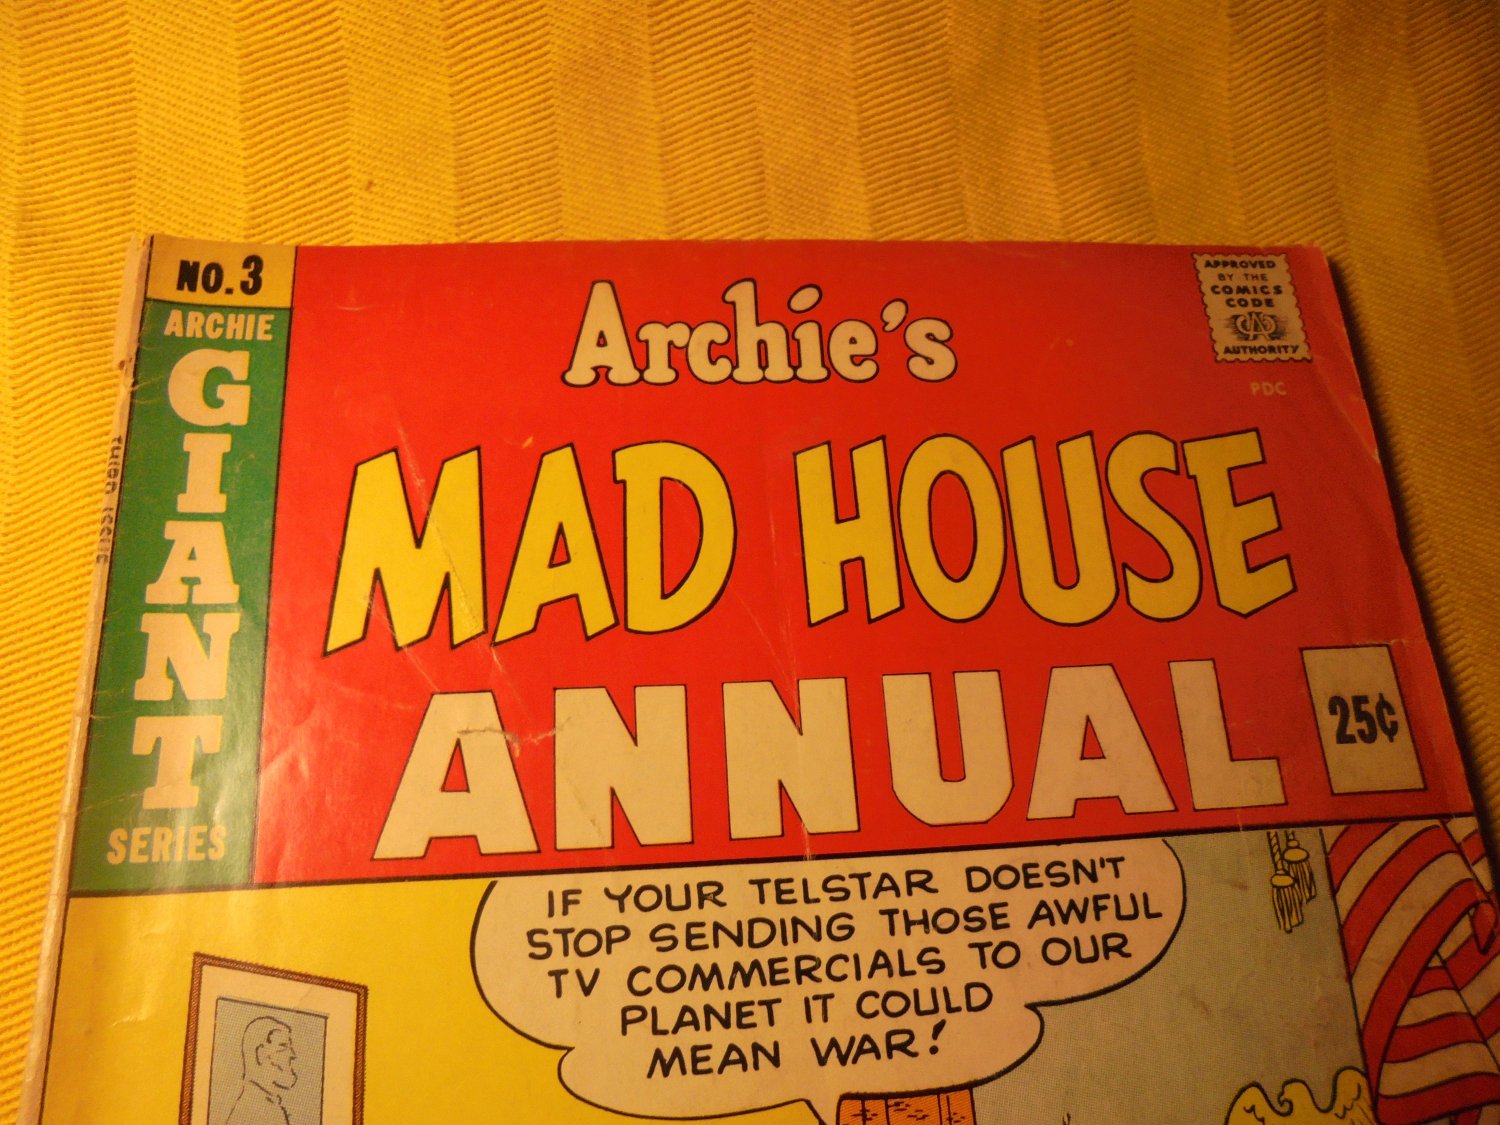 1st SABRINA The Teenage Witch!! Archie's Mad House Annual # 3 * 1965/66 * FN * $75.00 obo!!